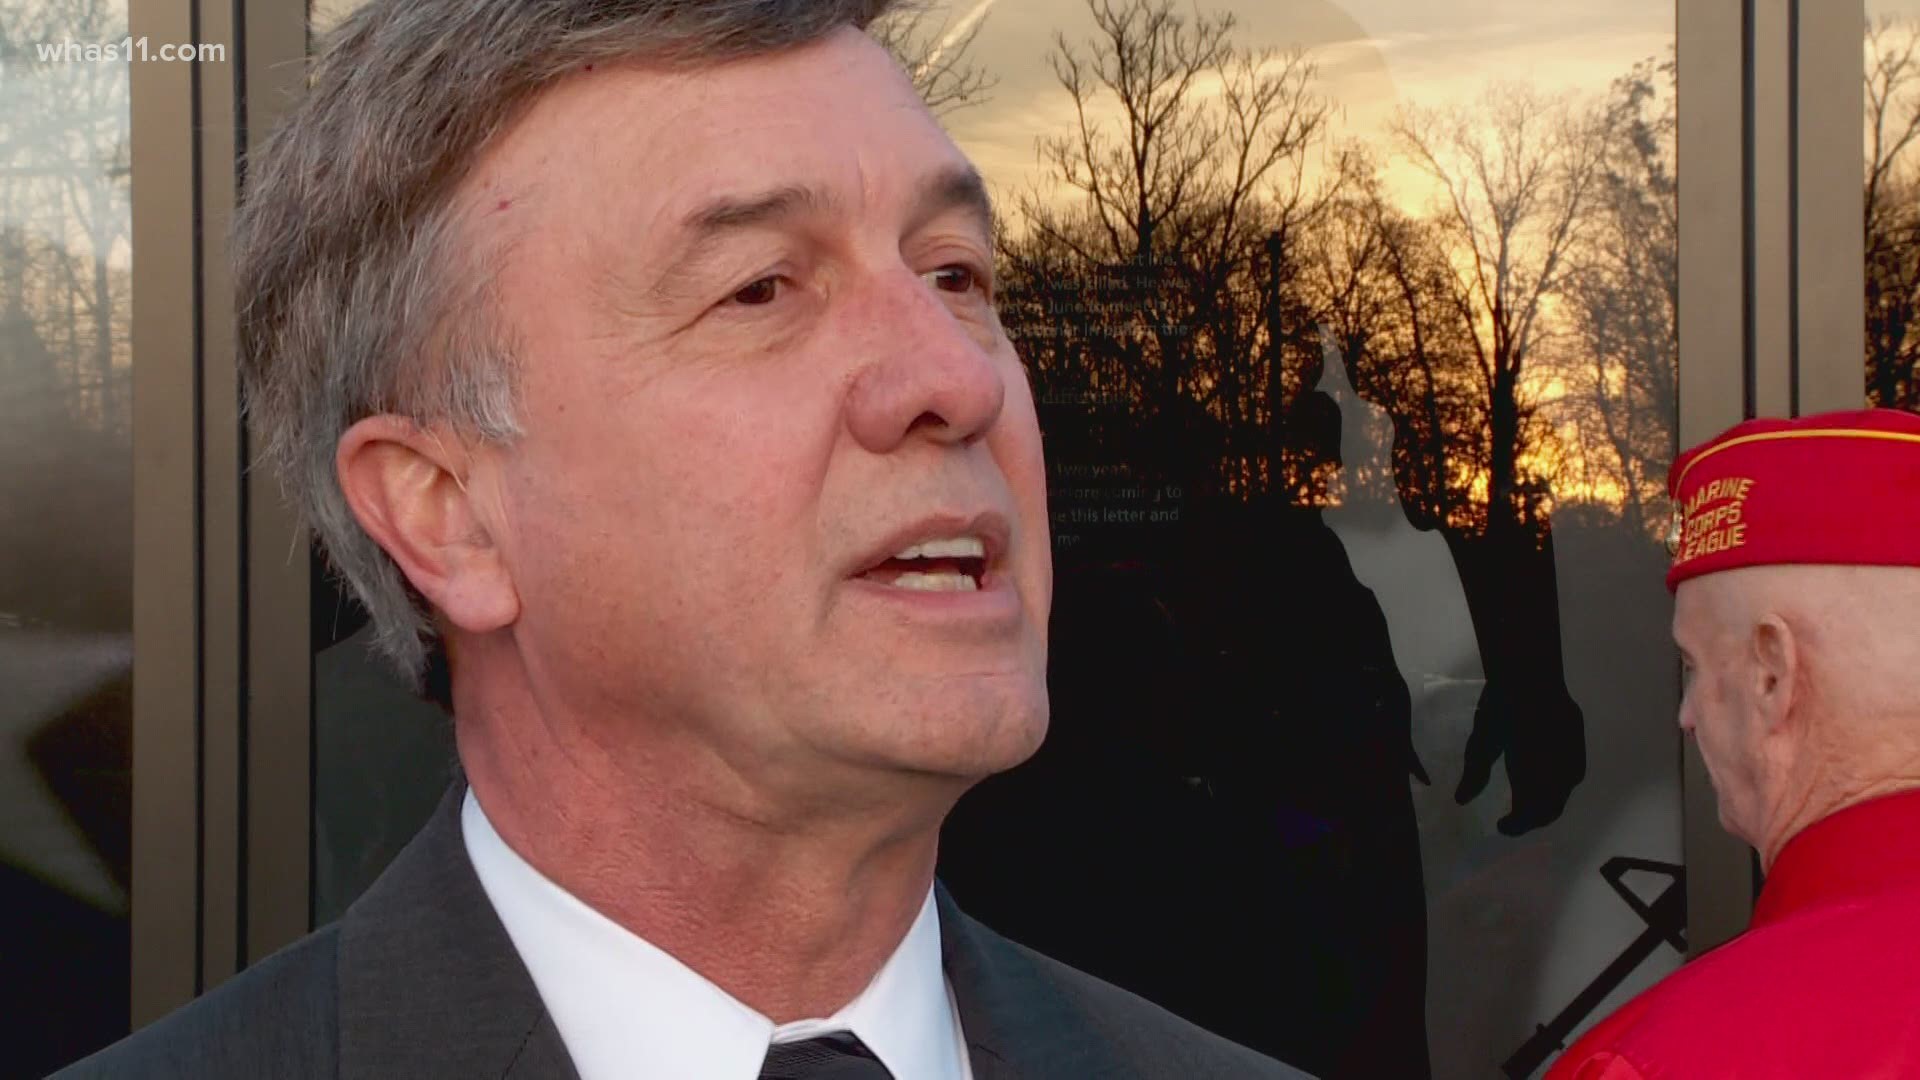 Bill Dieruf, the current mayor of Jeffersontown, announced his intention to run for Louisville mayor. a formal announcement is expected next week.